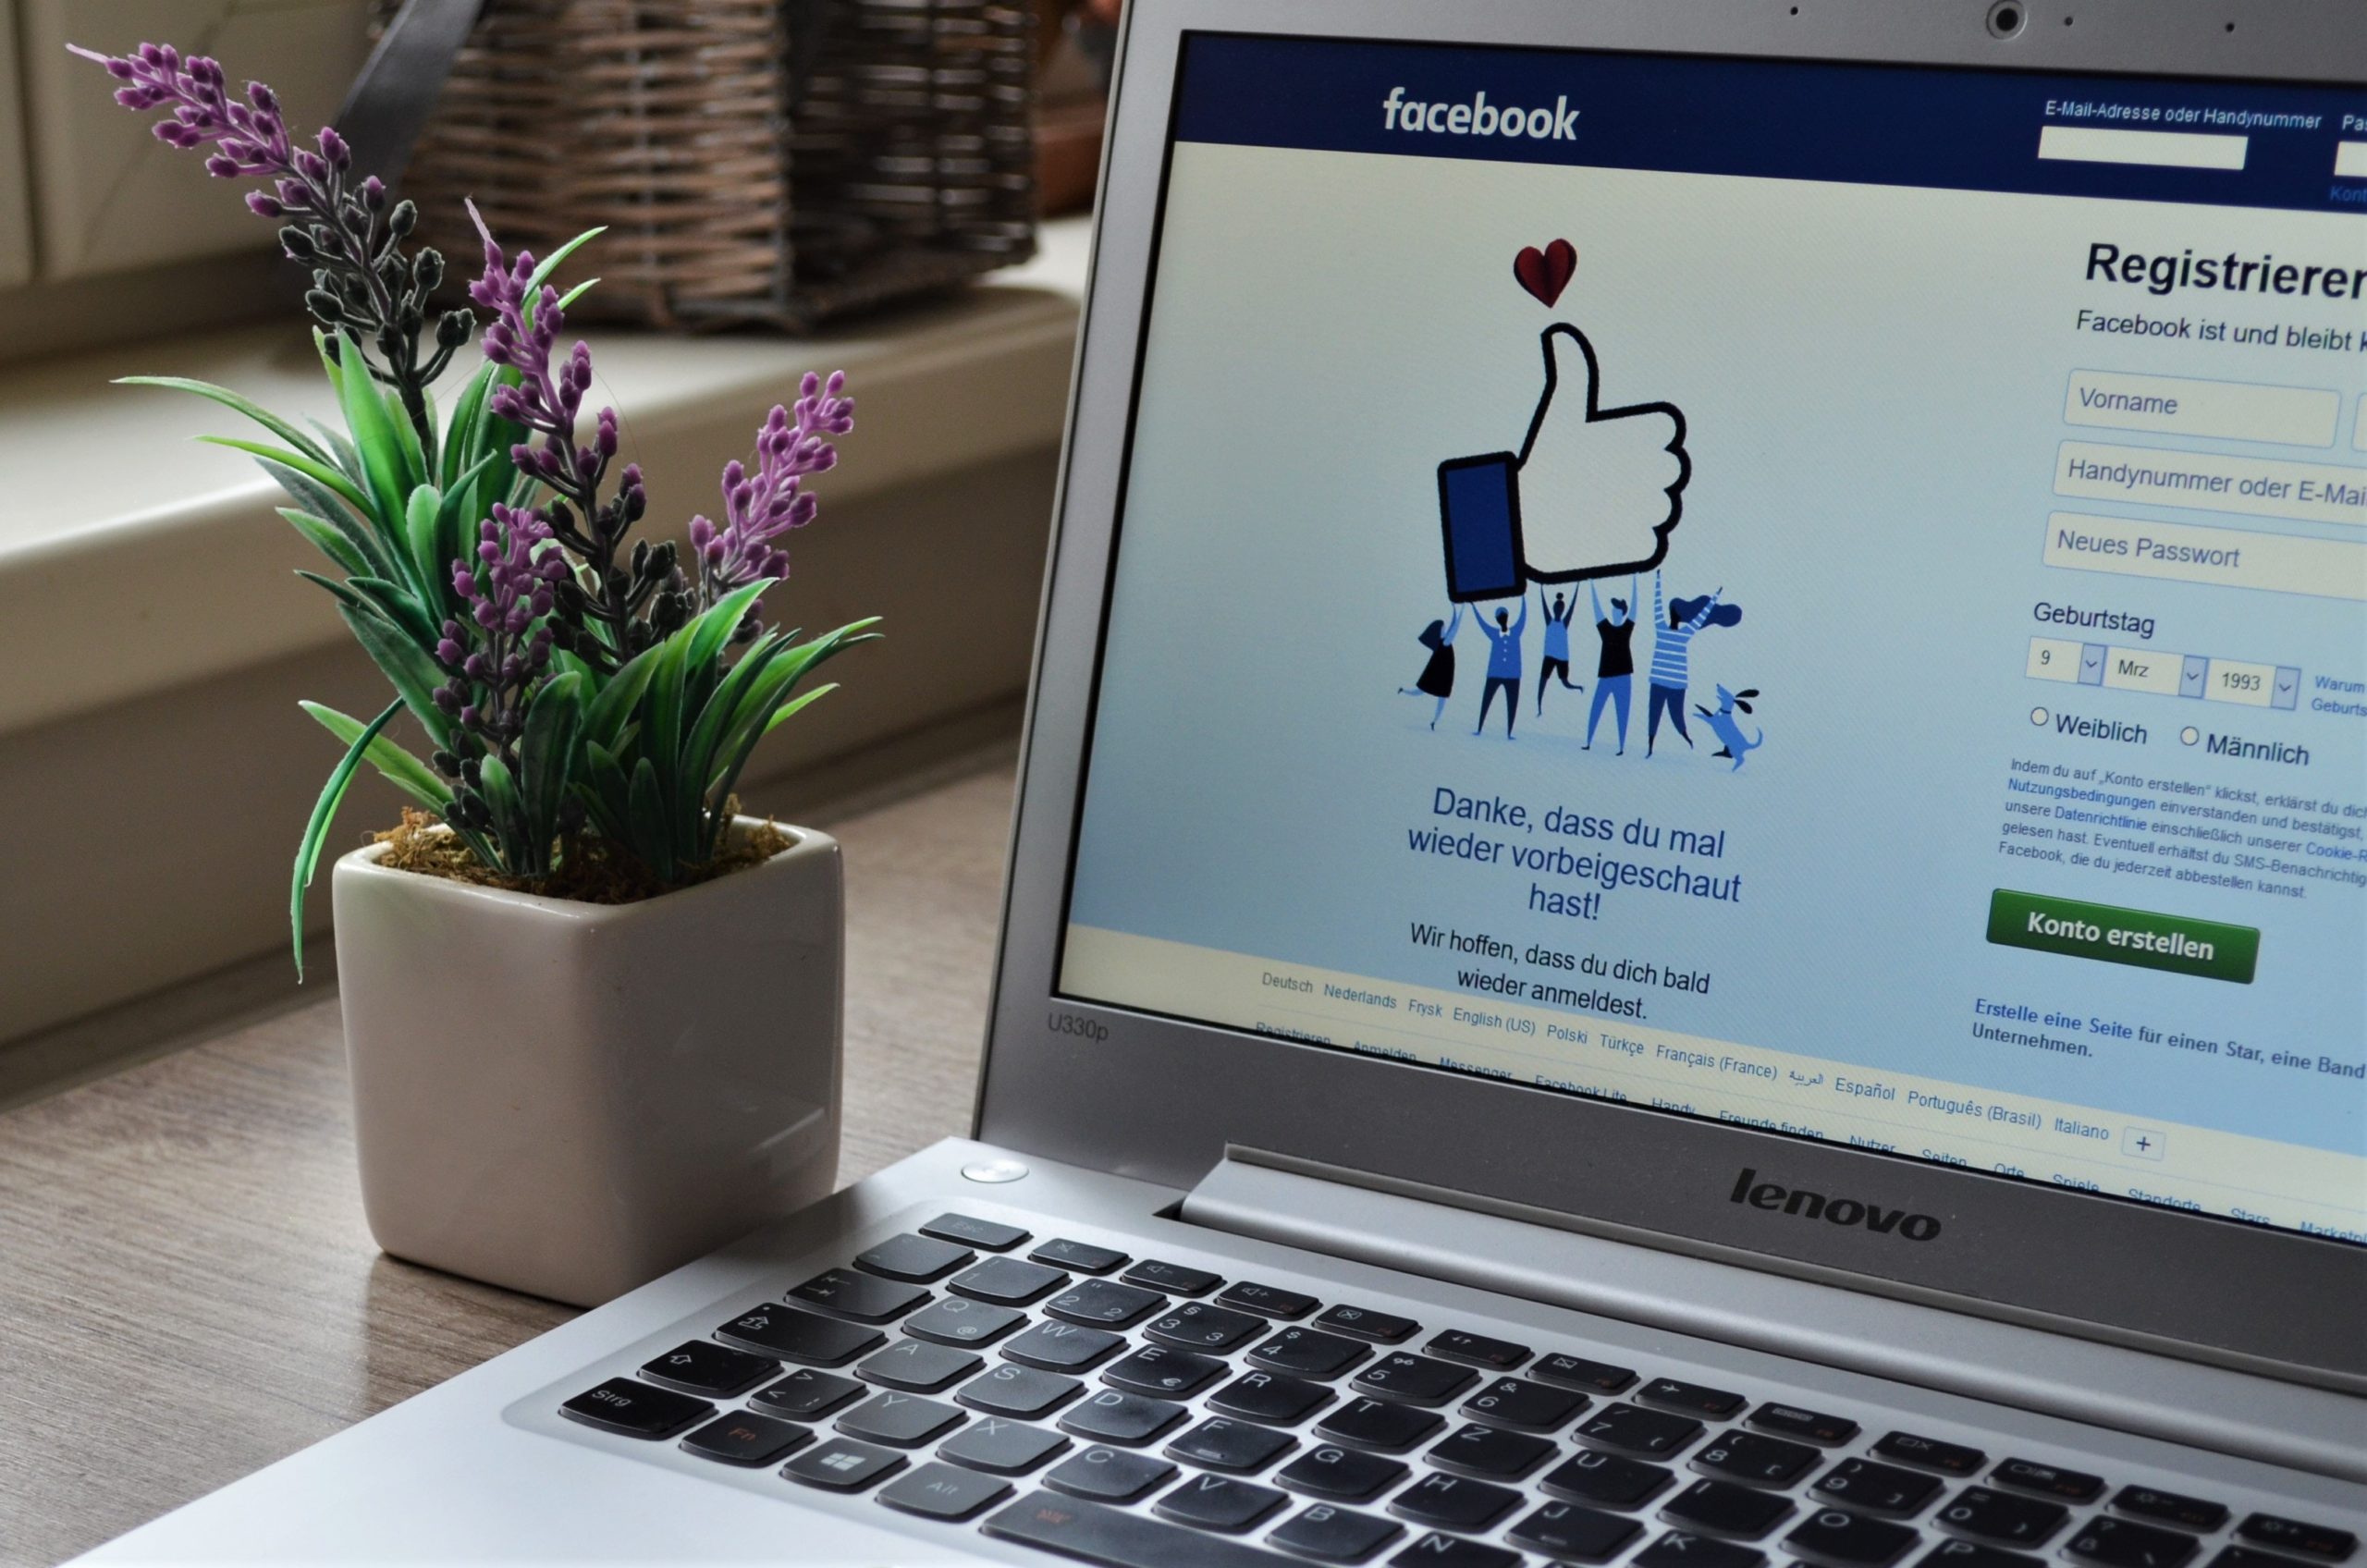 Facebook marketing for massage therapists